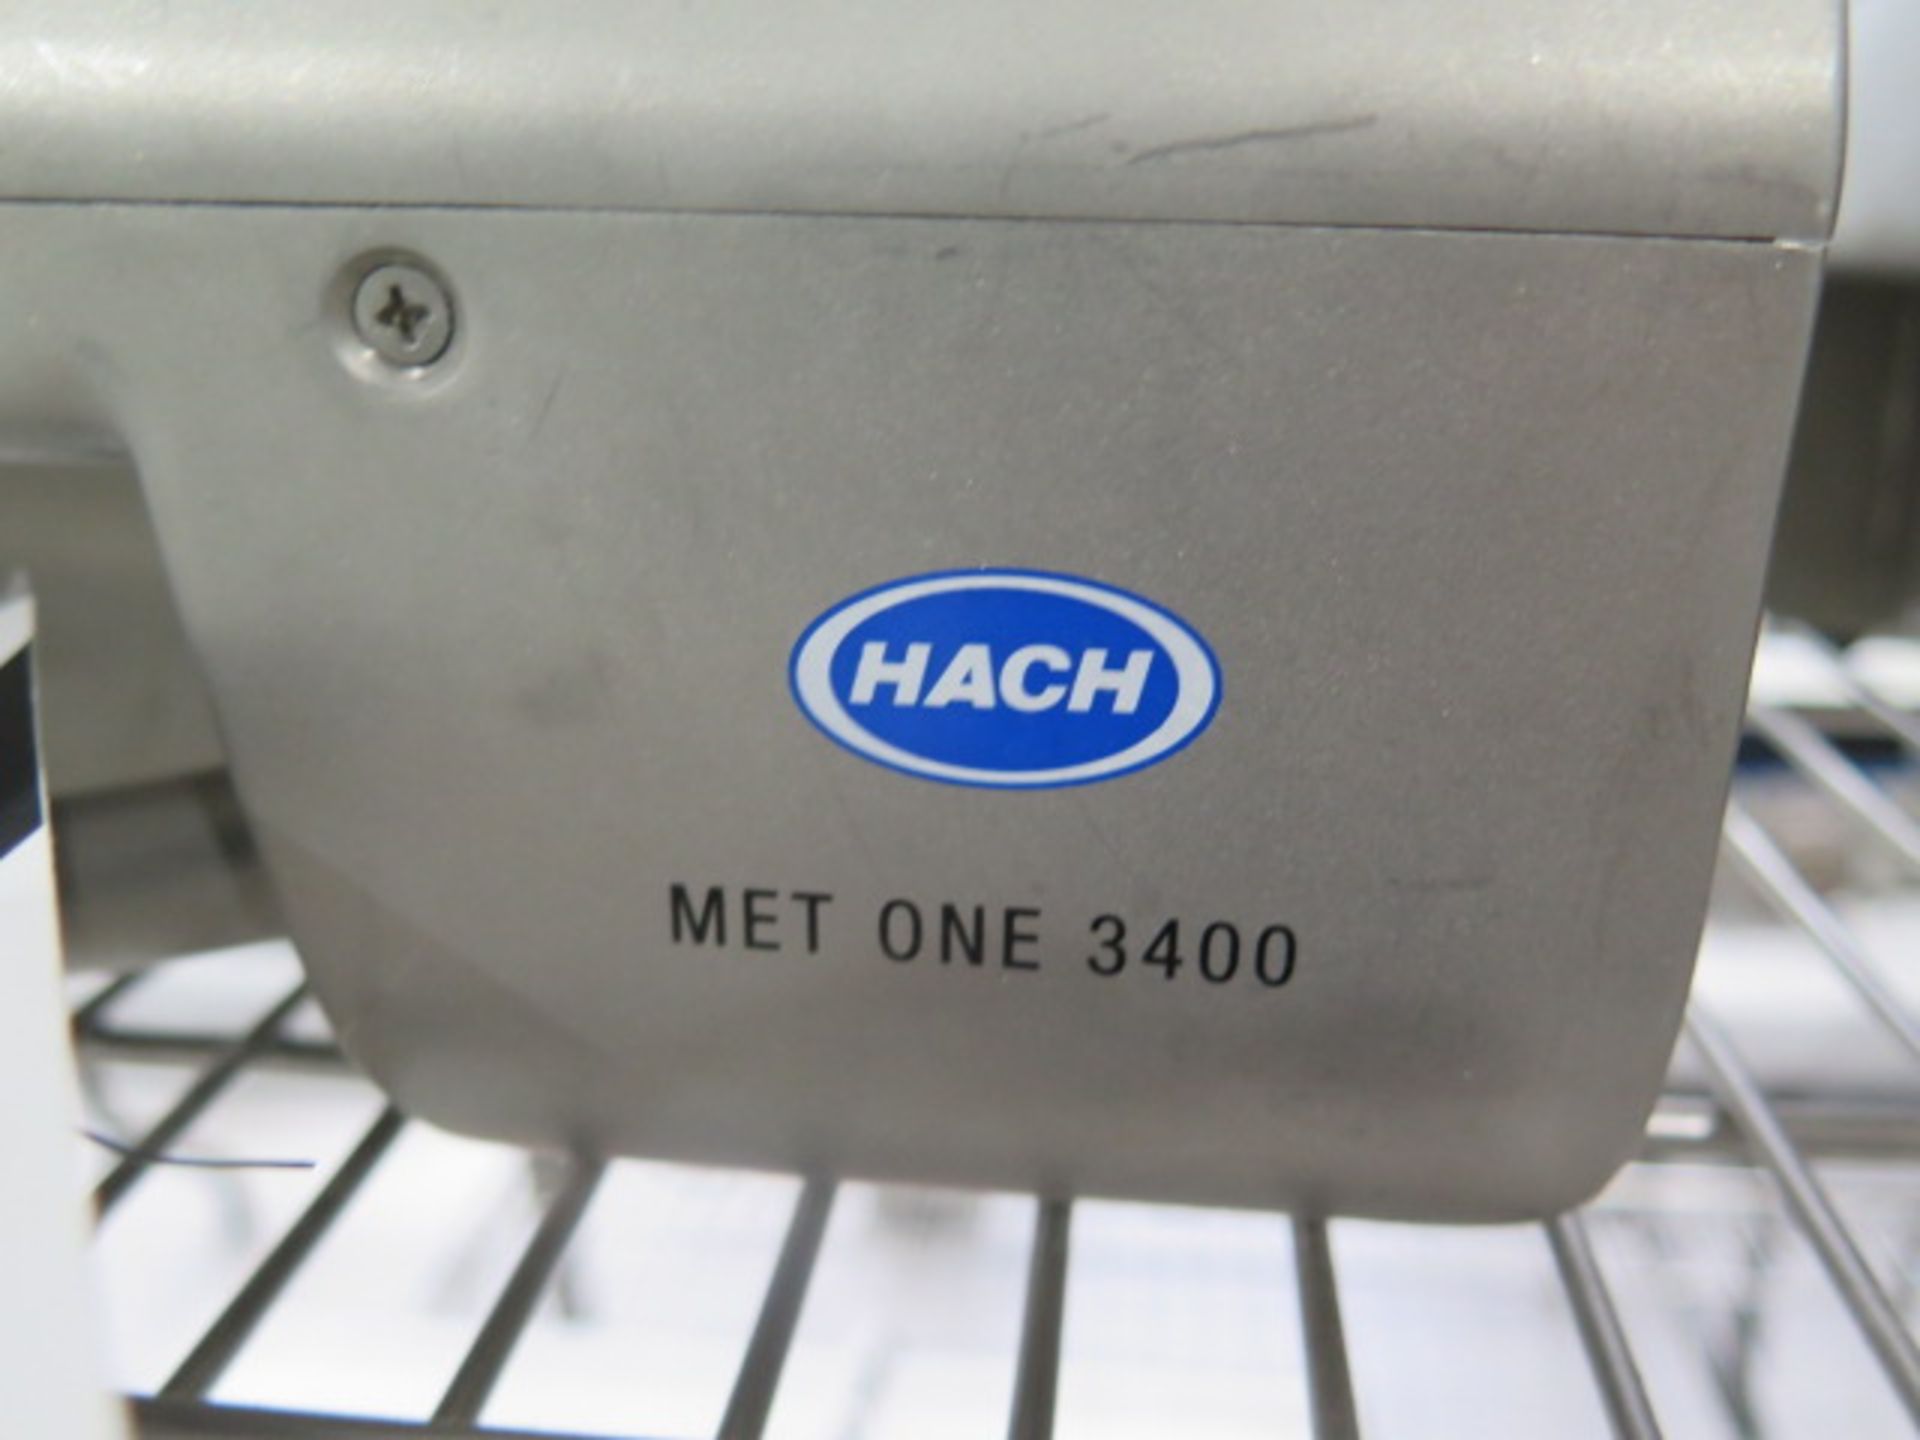 Hach MET ONE 3400 mdl. 3445 Particle Counter w/ Printer (SOLD AS-IS - NO WARRANTY) - Image 8 of 8